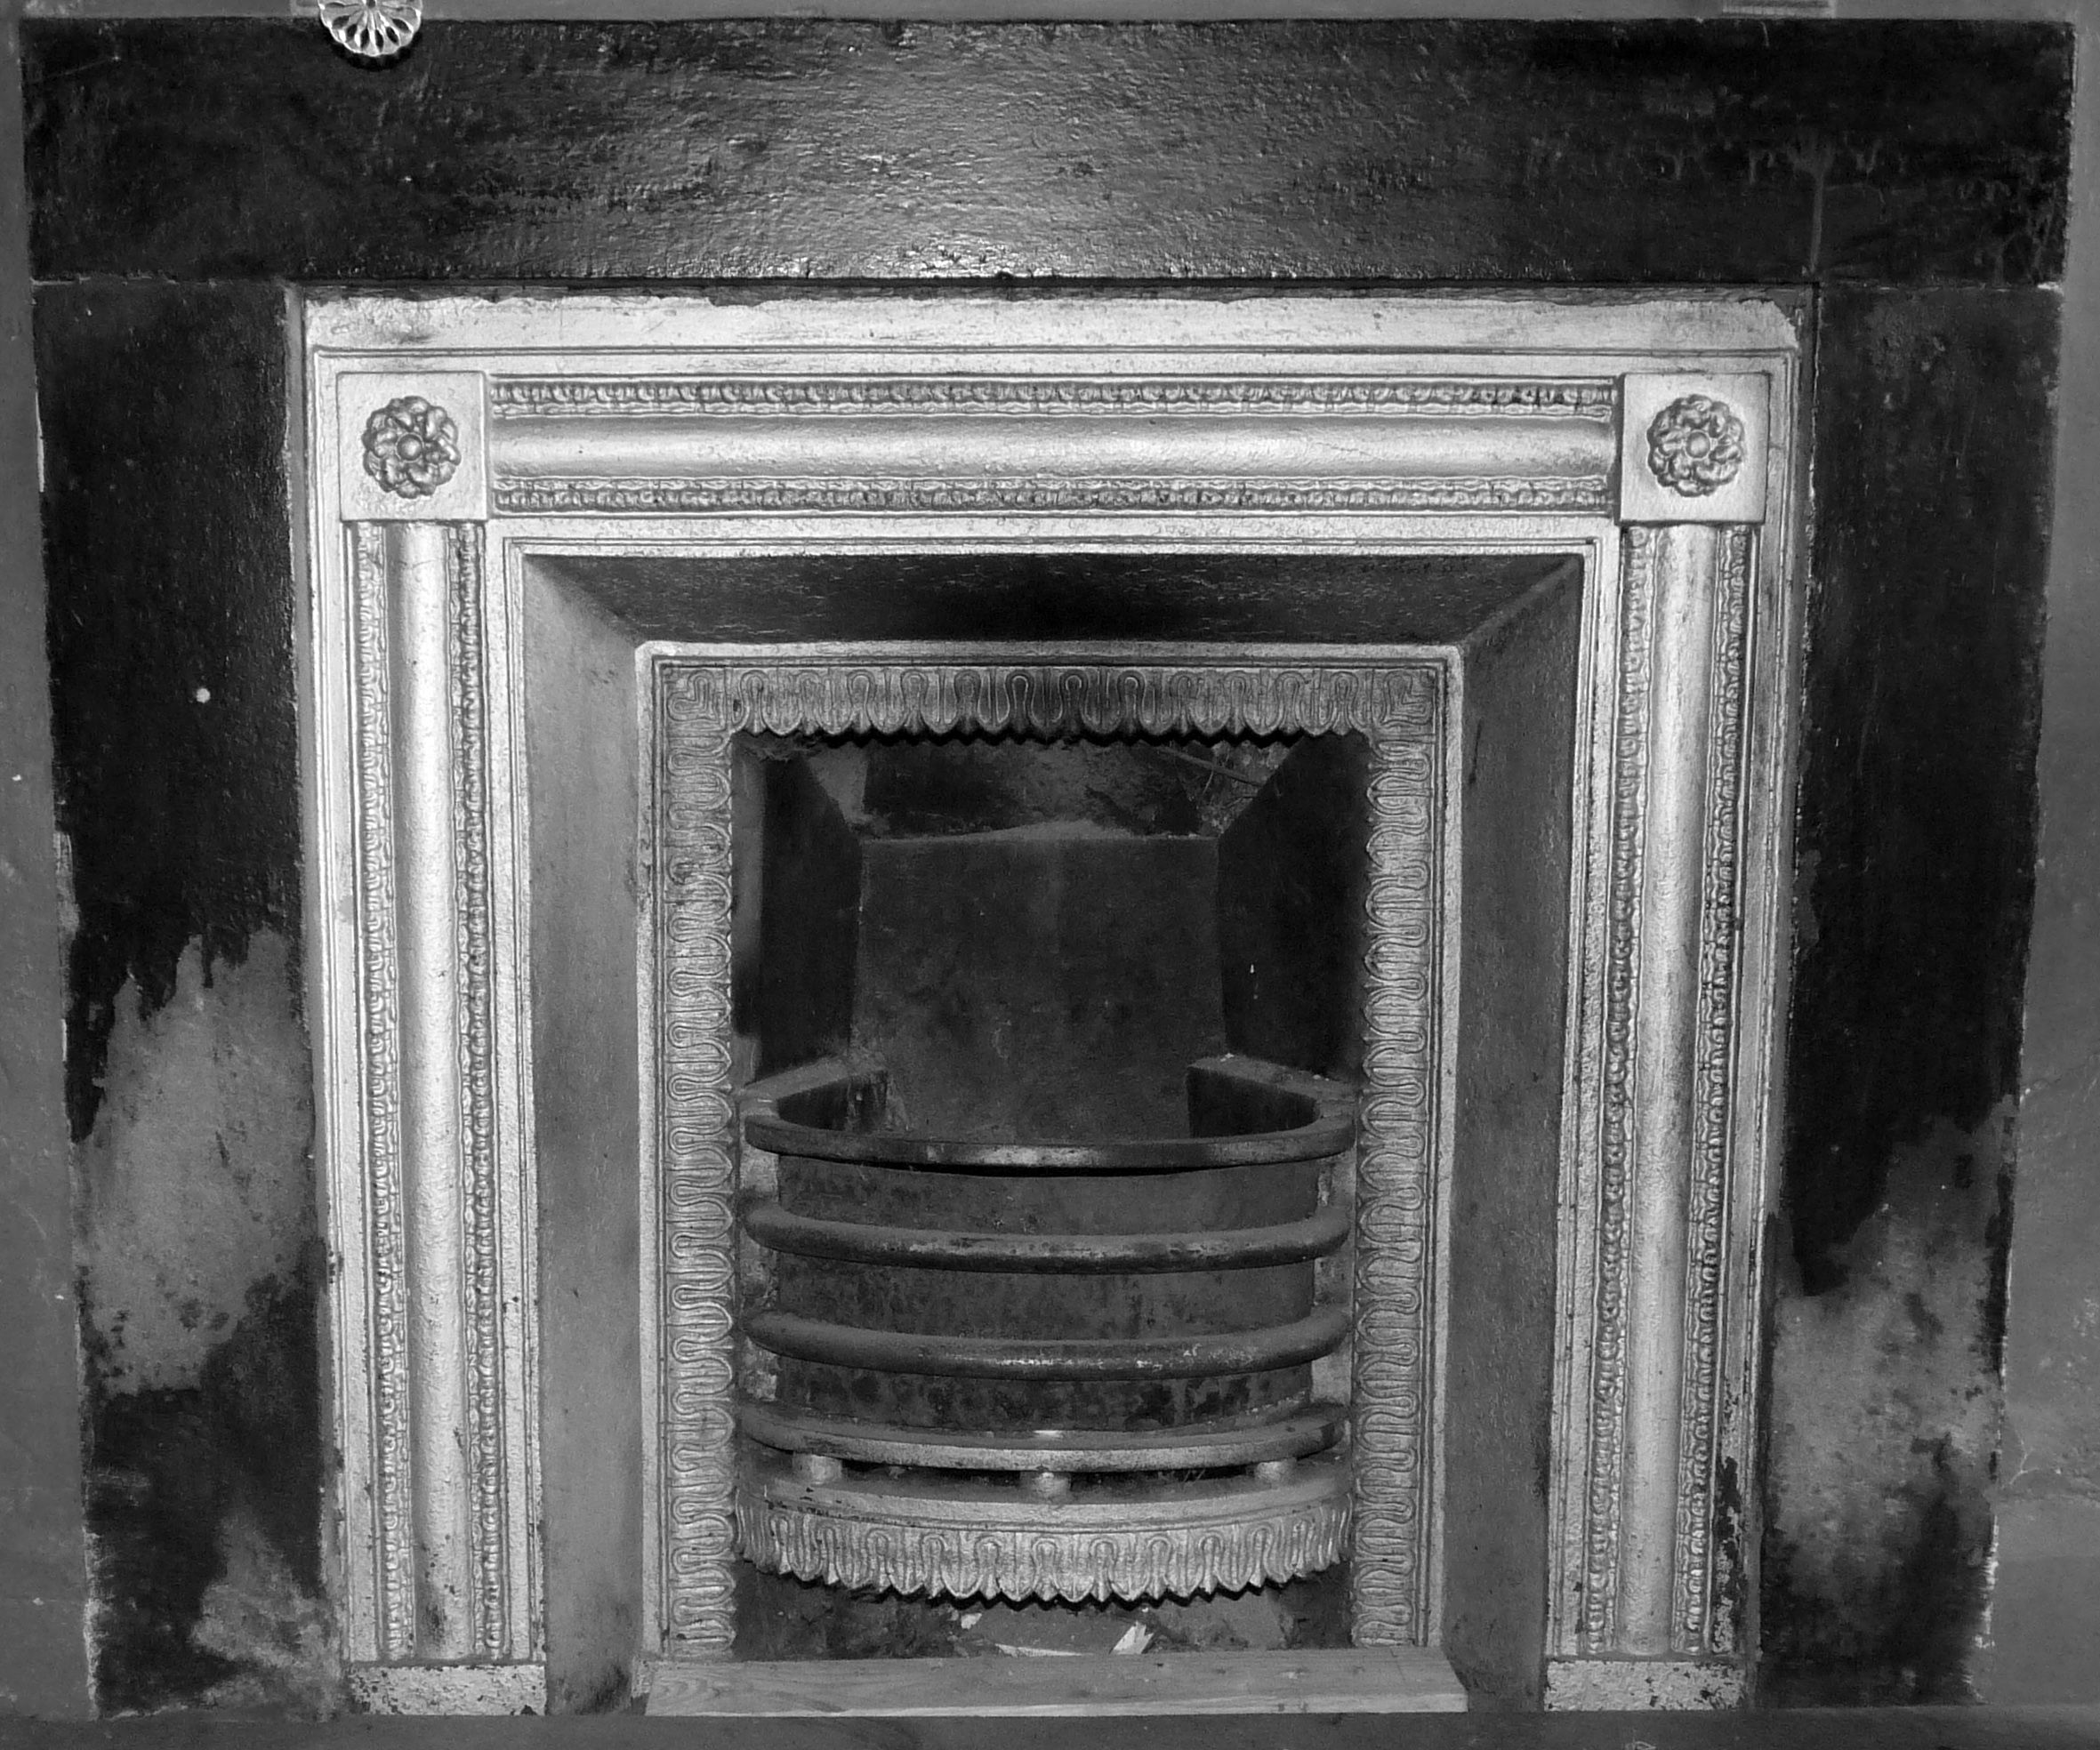 Black Friday Fireplace Deals Unique Cast Iron Fireplace In the Bedroom Painted Silver sometime